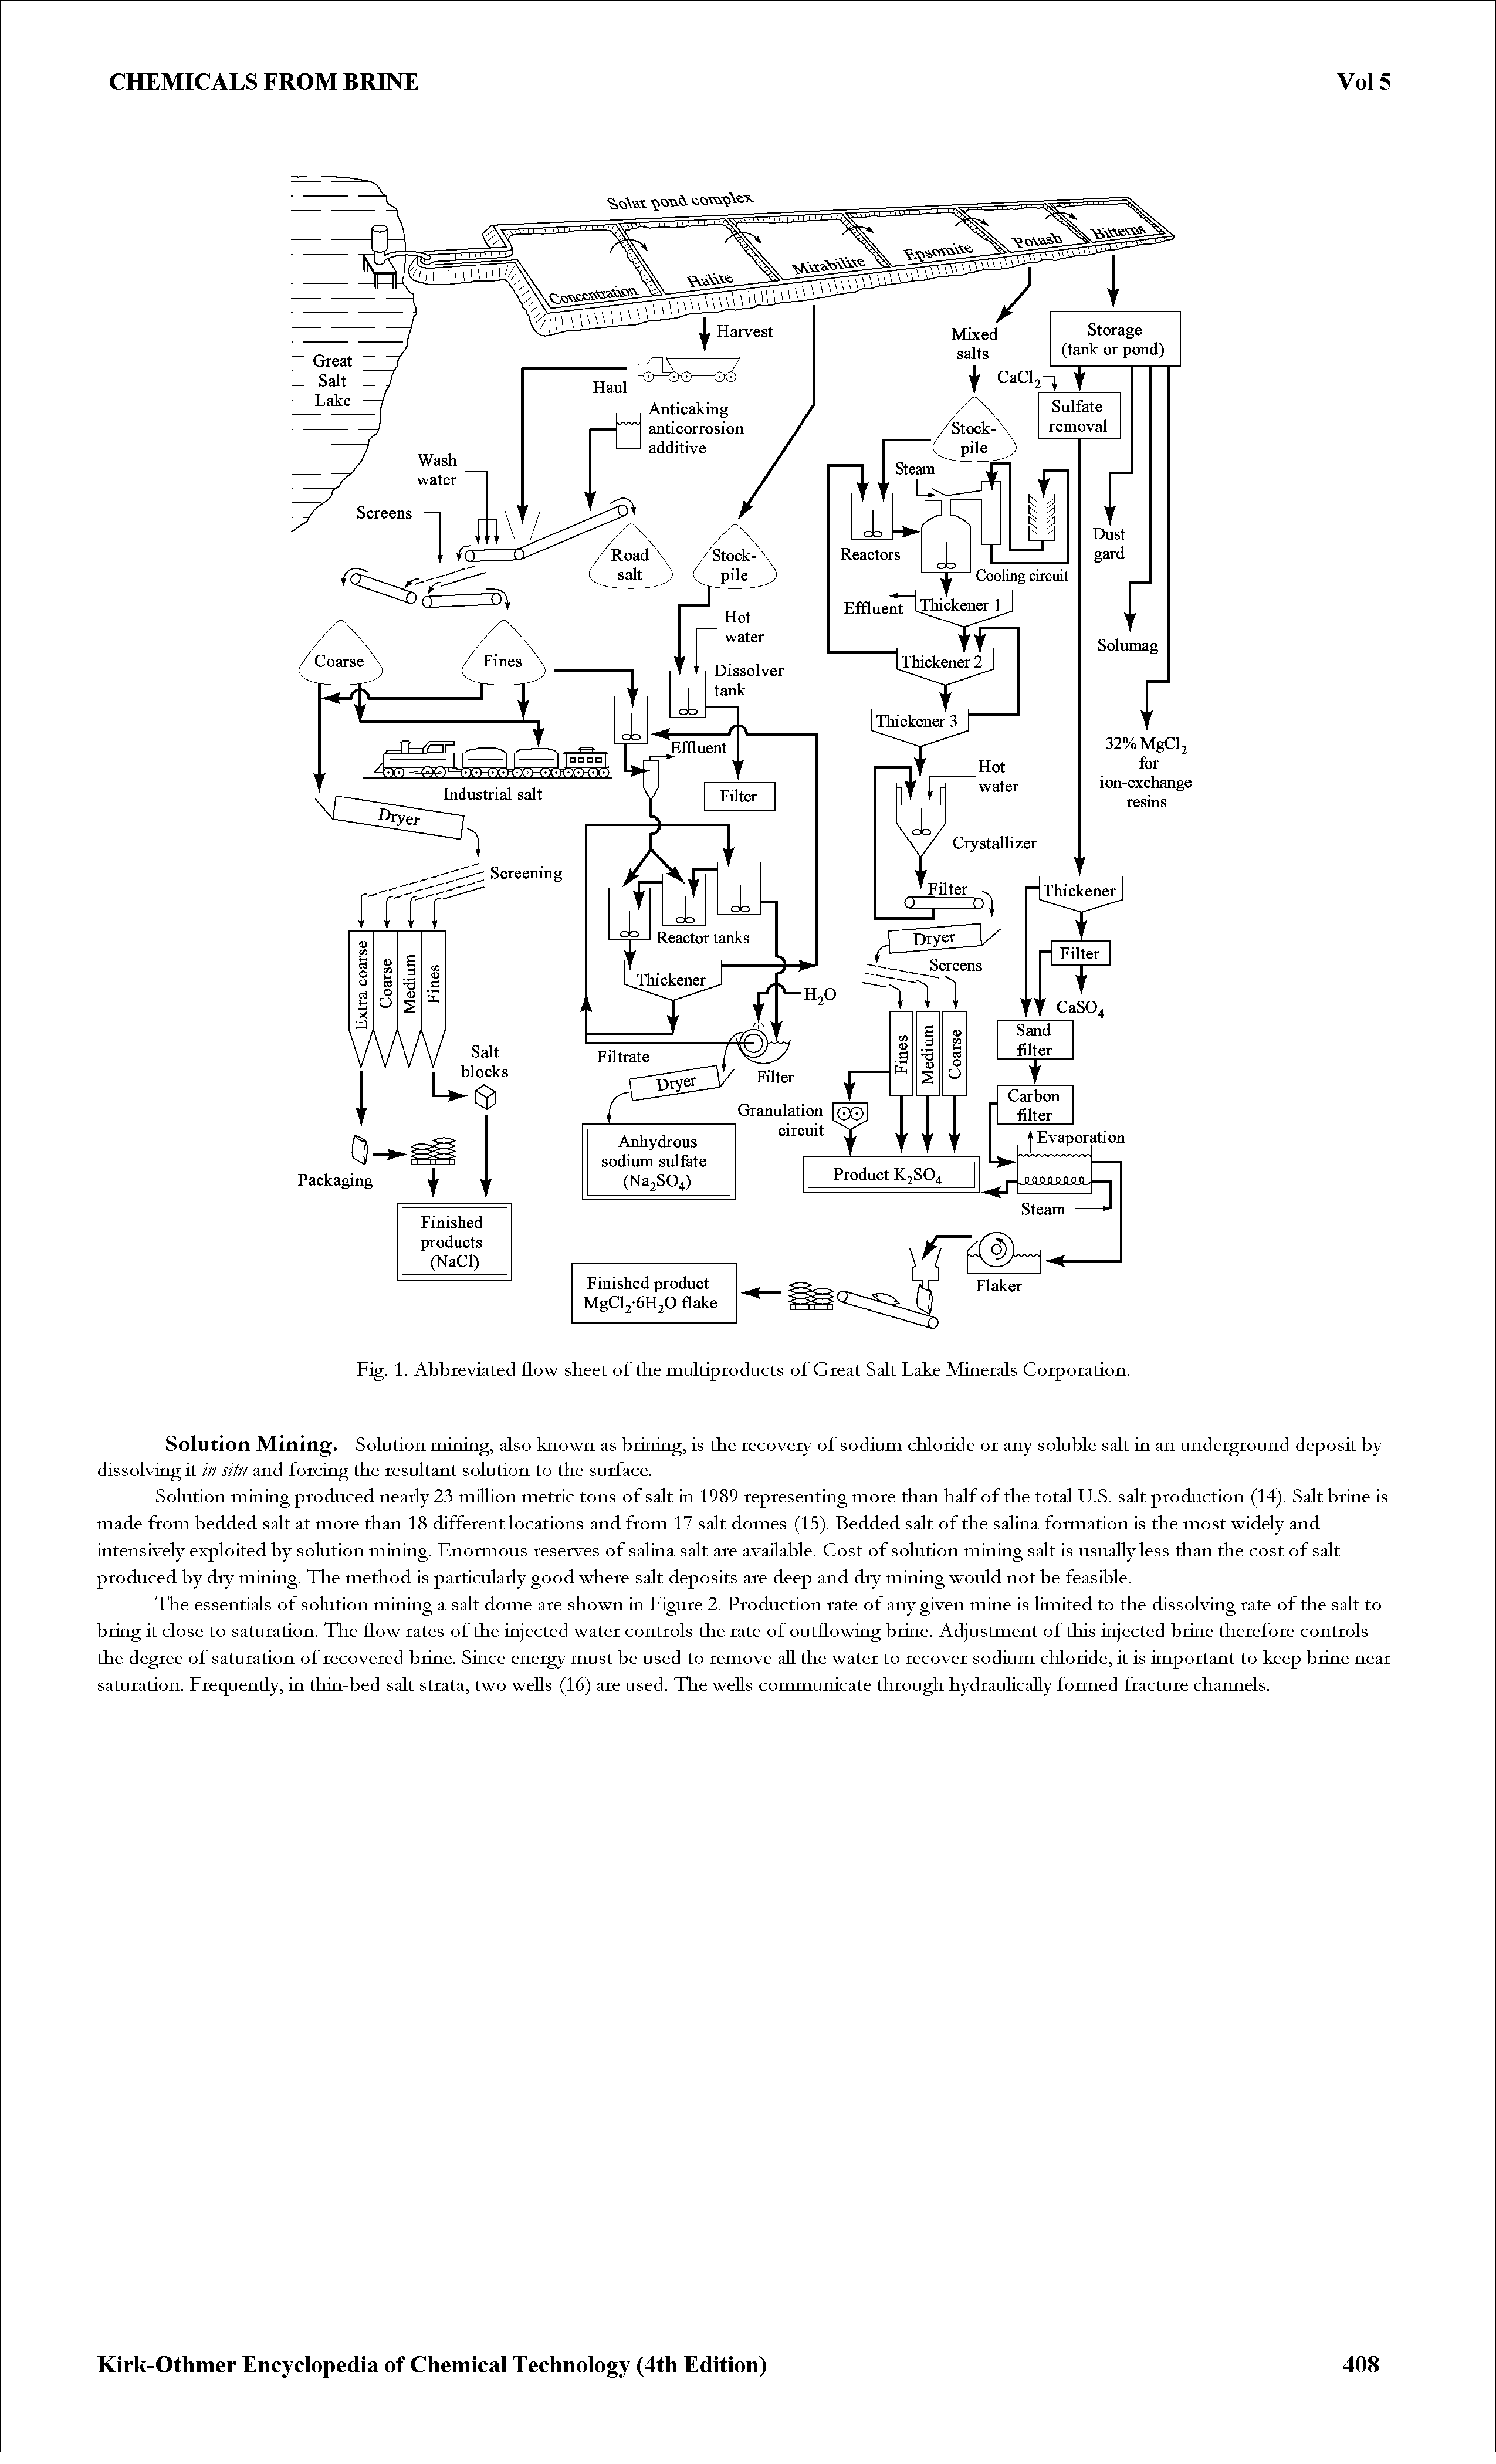 Fig. 1. Abbreviated flow sheet of the multiproducts of Great Salt Lake Minerals Corporation.